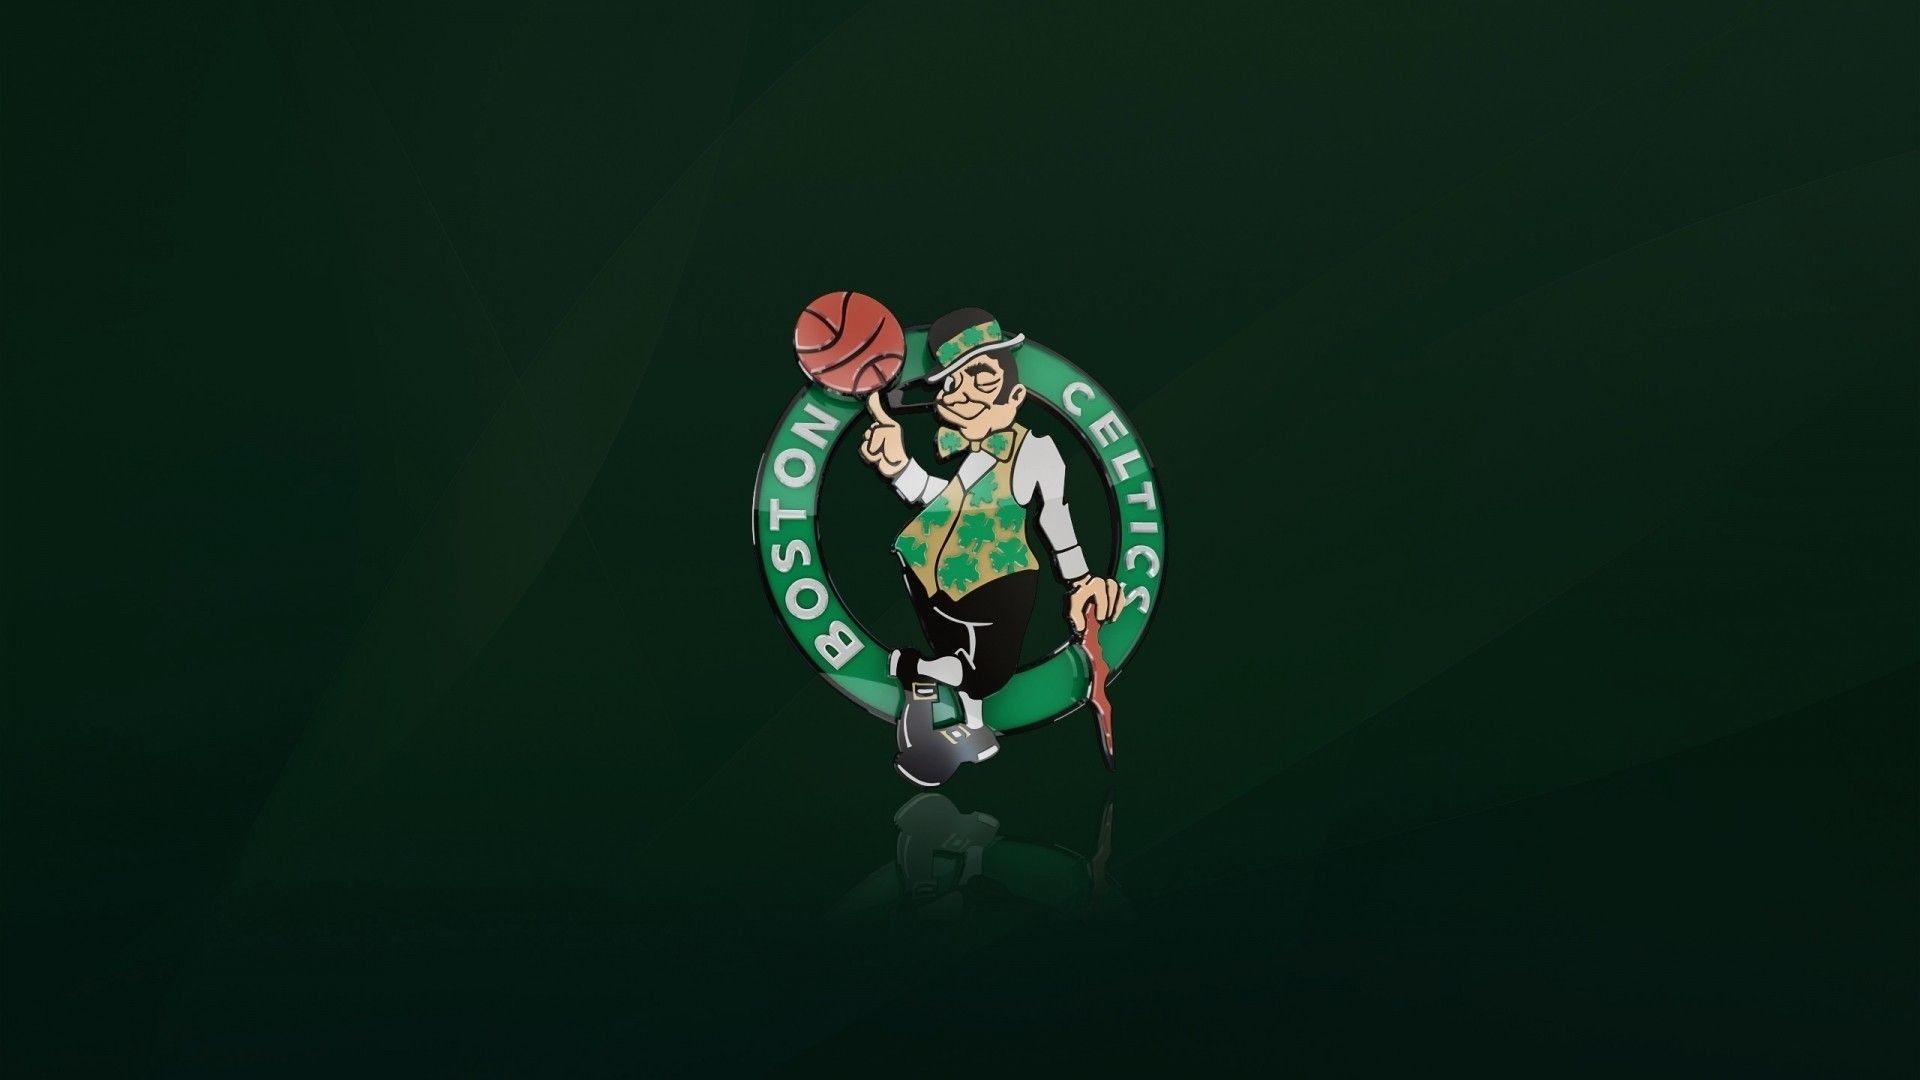 1920x1080 undefined Nba Wallpaper Hd (49 Wallpapers) | Adorable Wallpapers